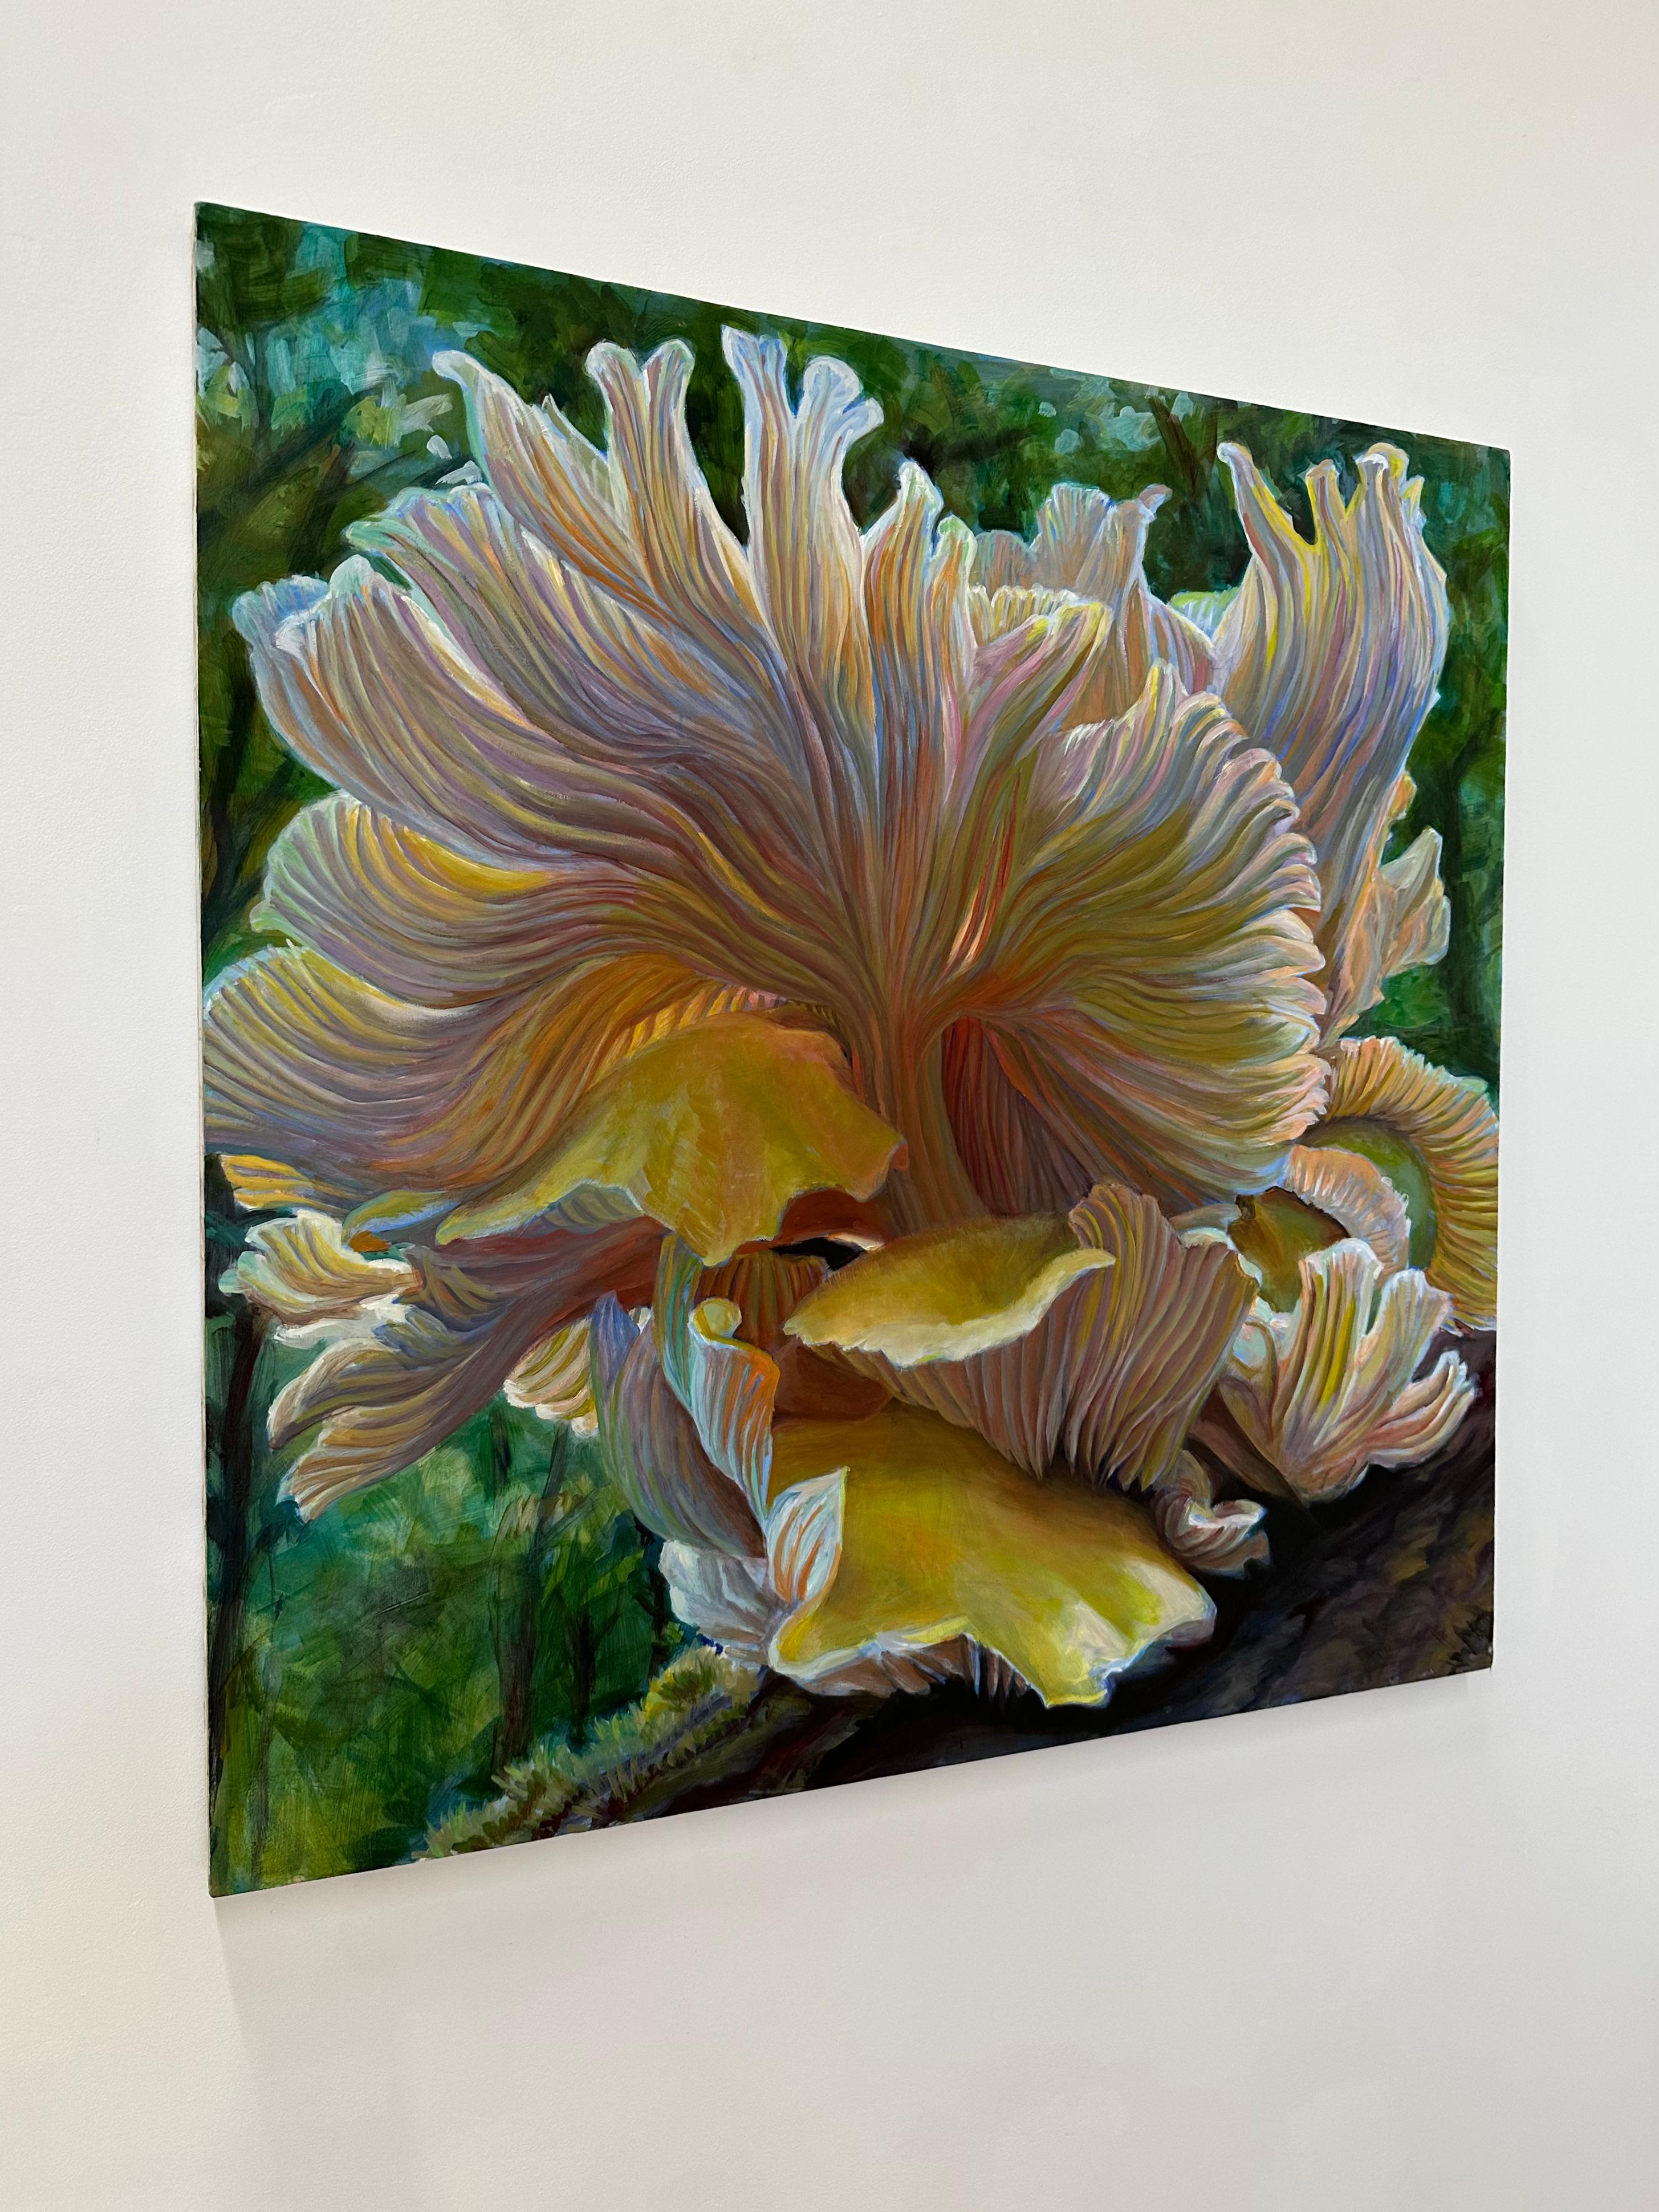 Golden Oysters One, Mushroom Fungi Still Life Painting, Yellow, Peach, Green For Sale 1